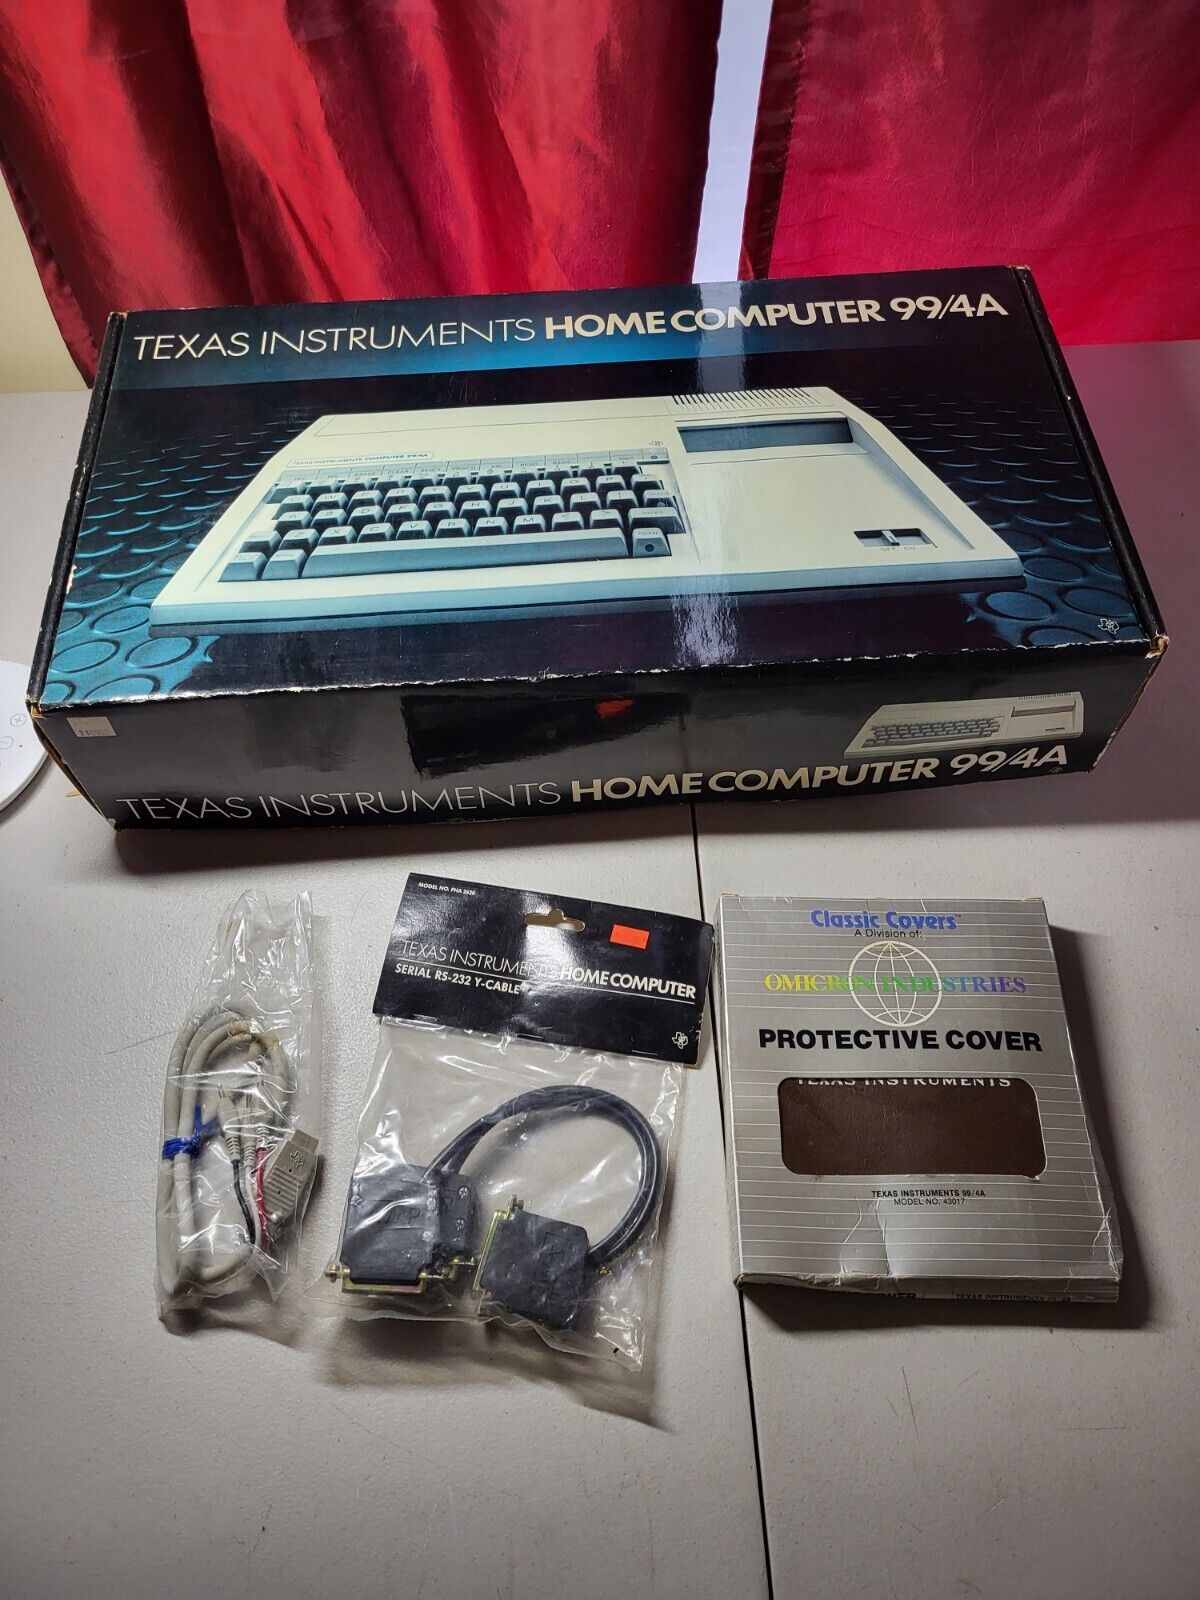 NOS Vintage Texas Instruments TI99/4A Home Computer, New Old Stock Open Box #2